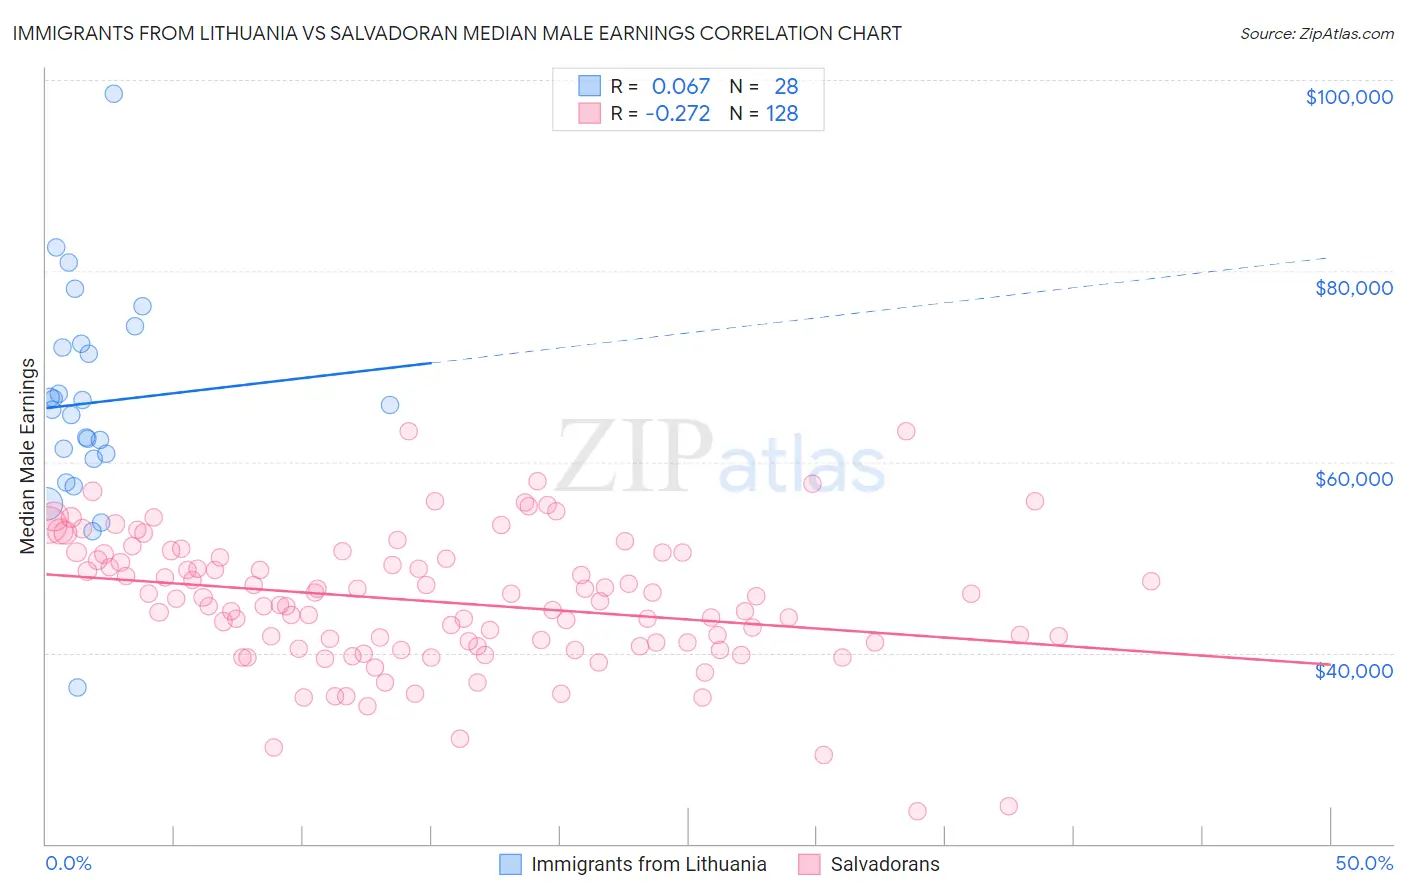 Immigrants from Lithuania vs Salvadoran Median Male Earnings